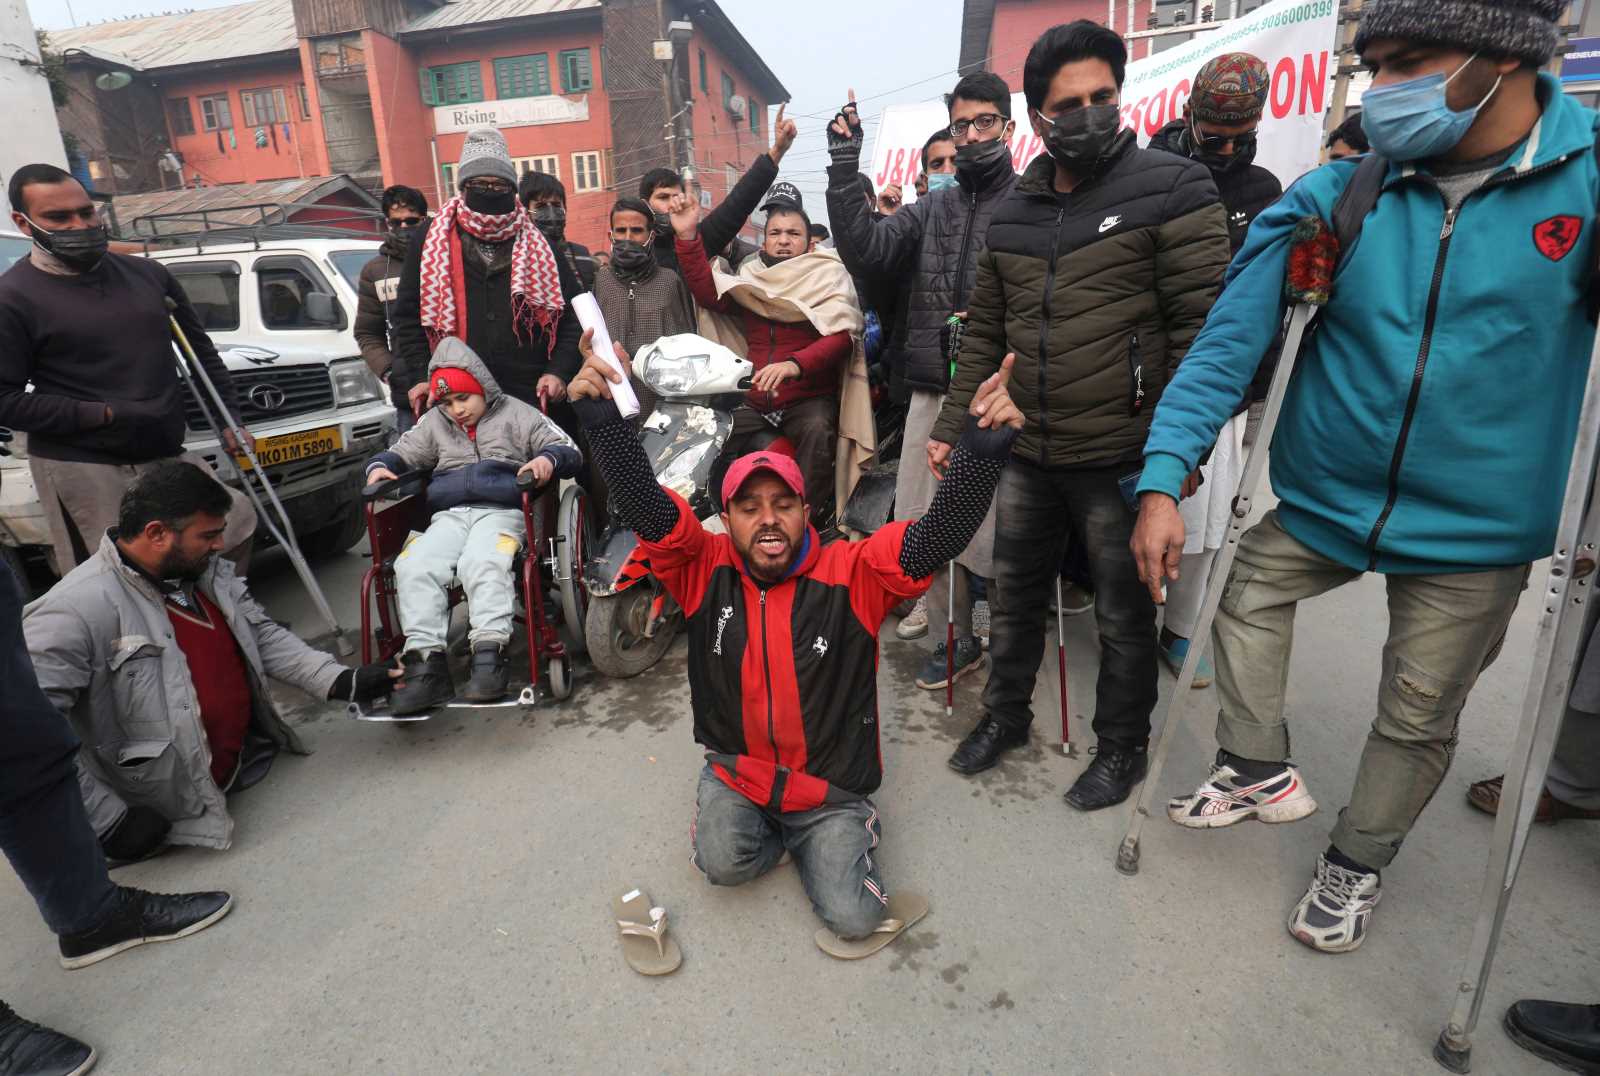 Protesters in Kashmir demand better living conditions for people with disabilities, 2020.